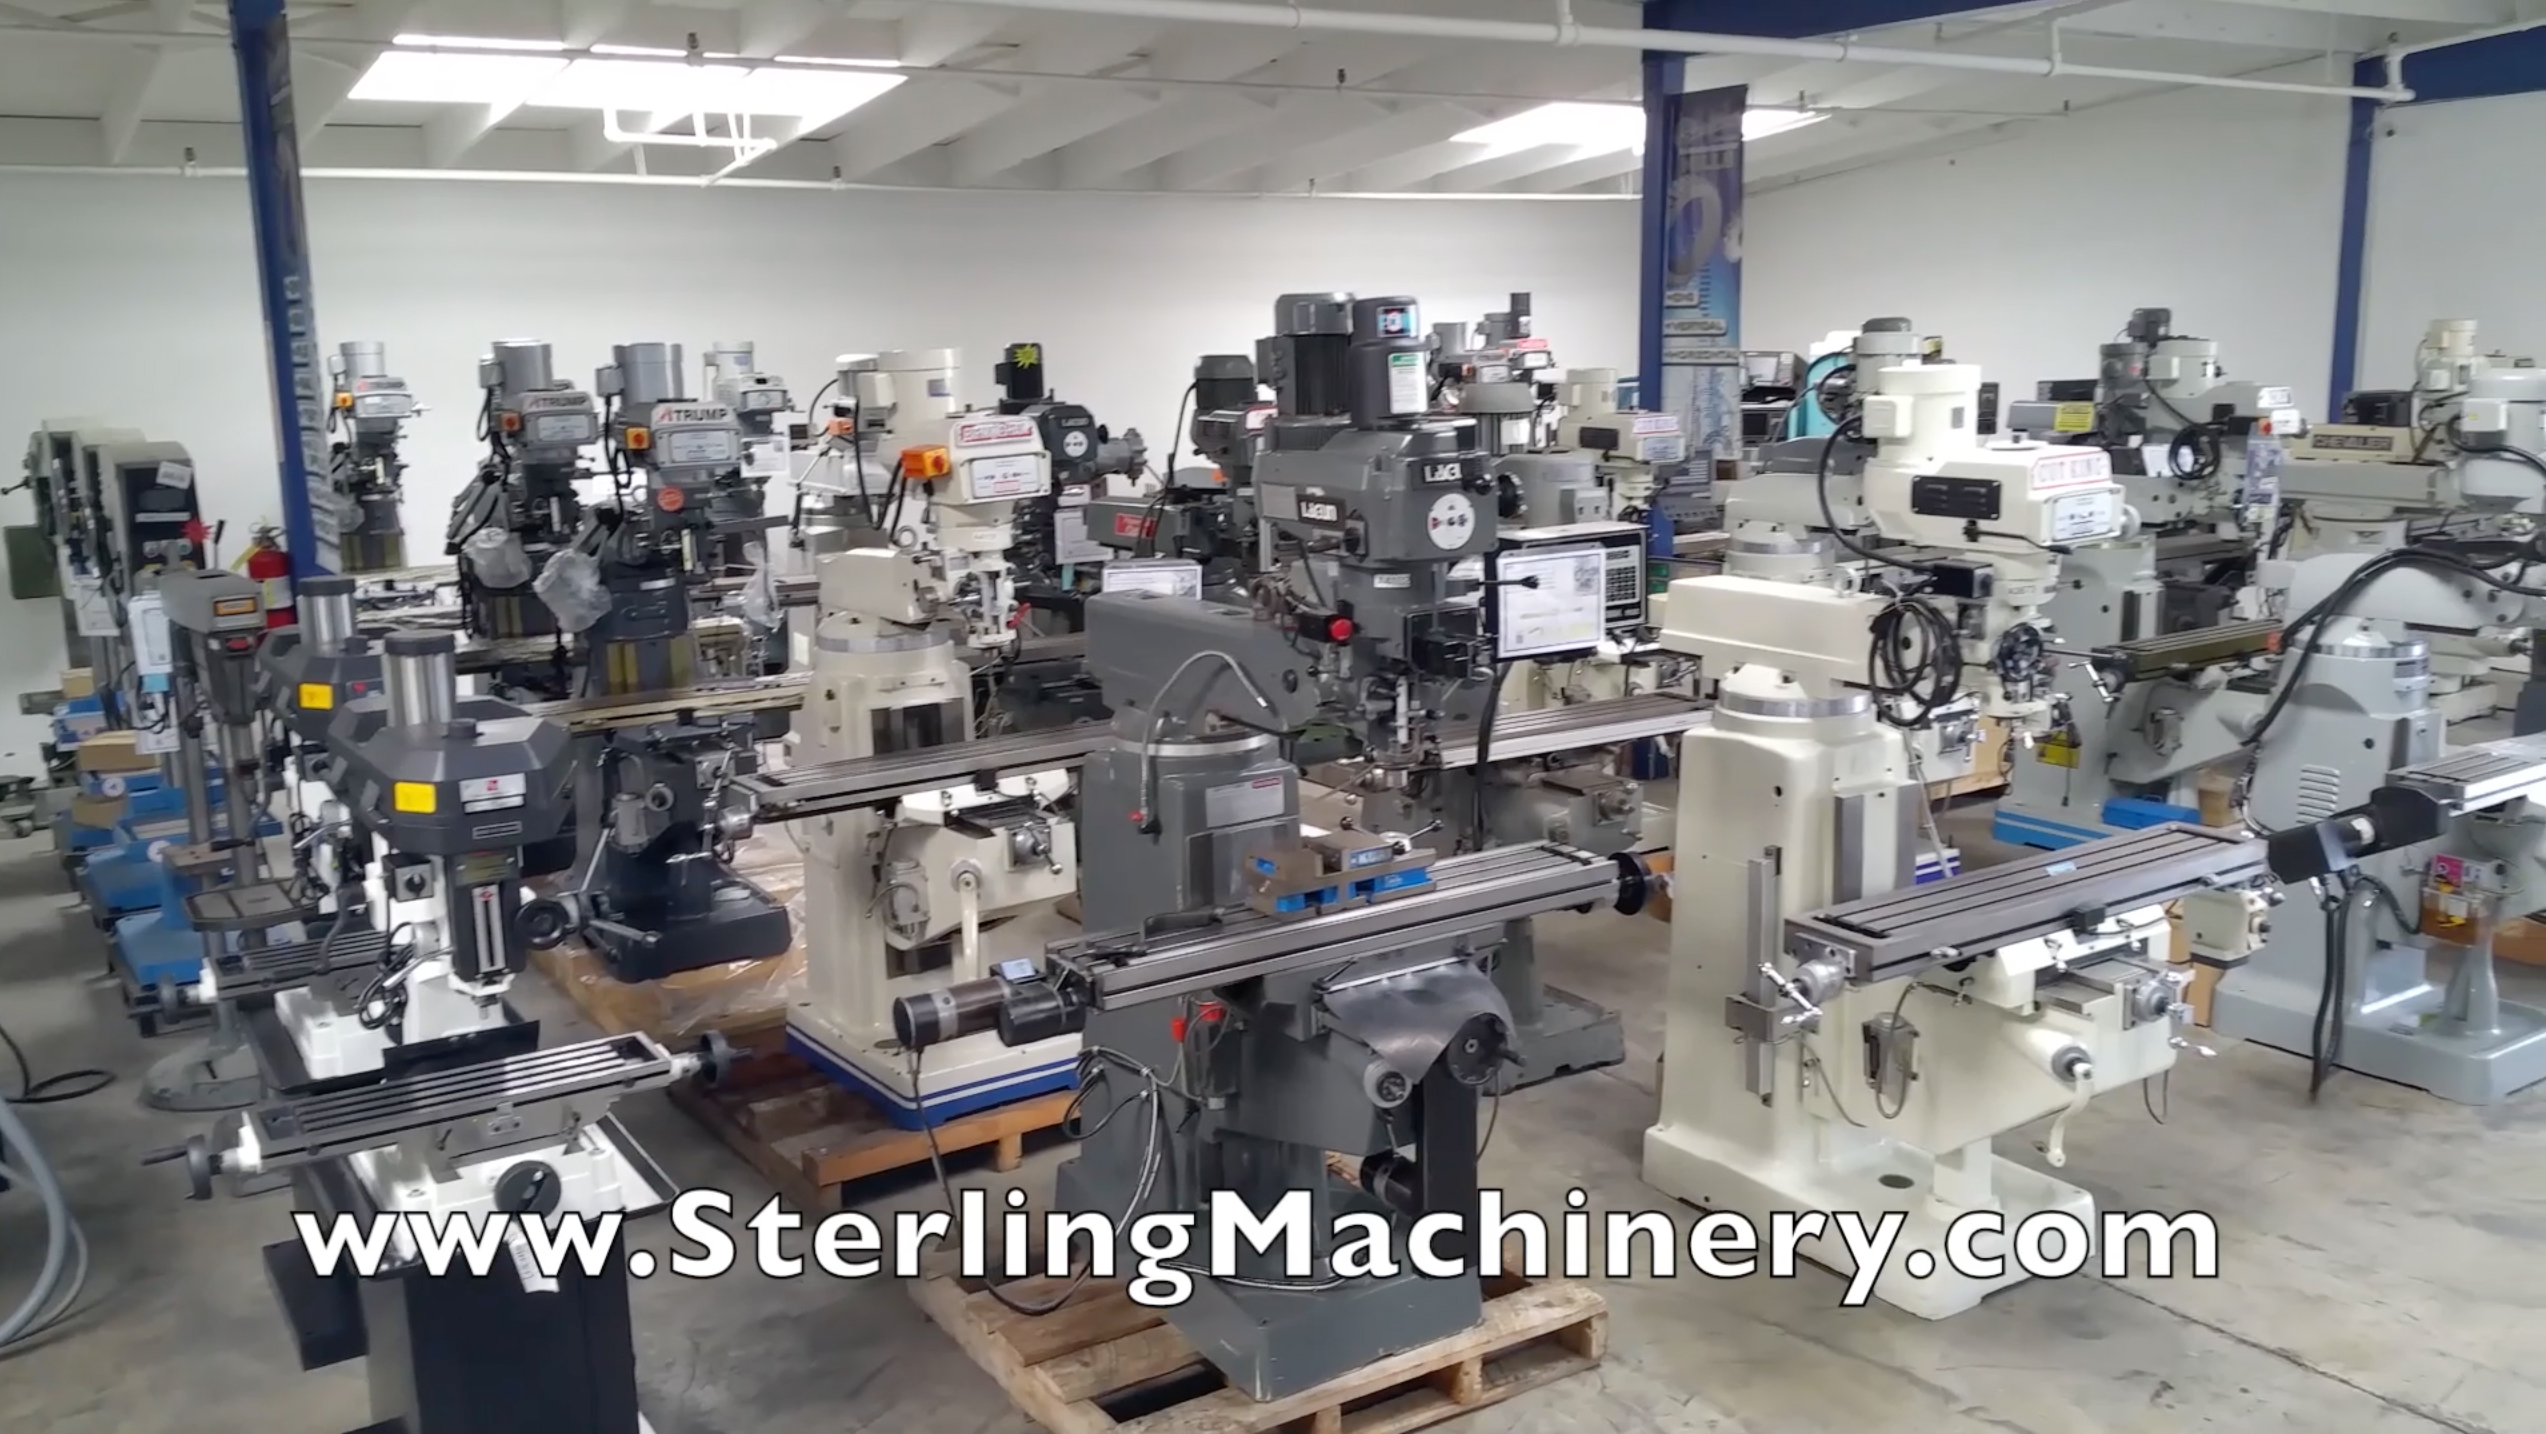 Sterling Machinery Exchange Company video www.SterlingMachinery.com